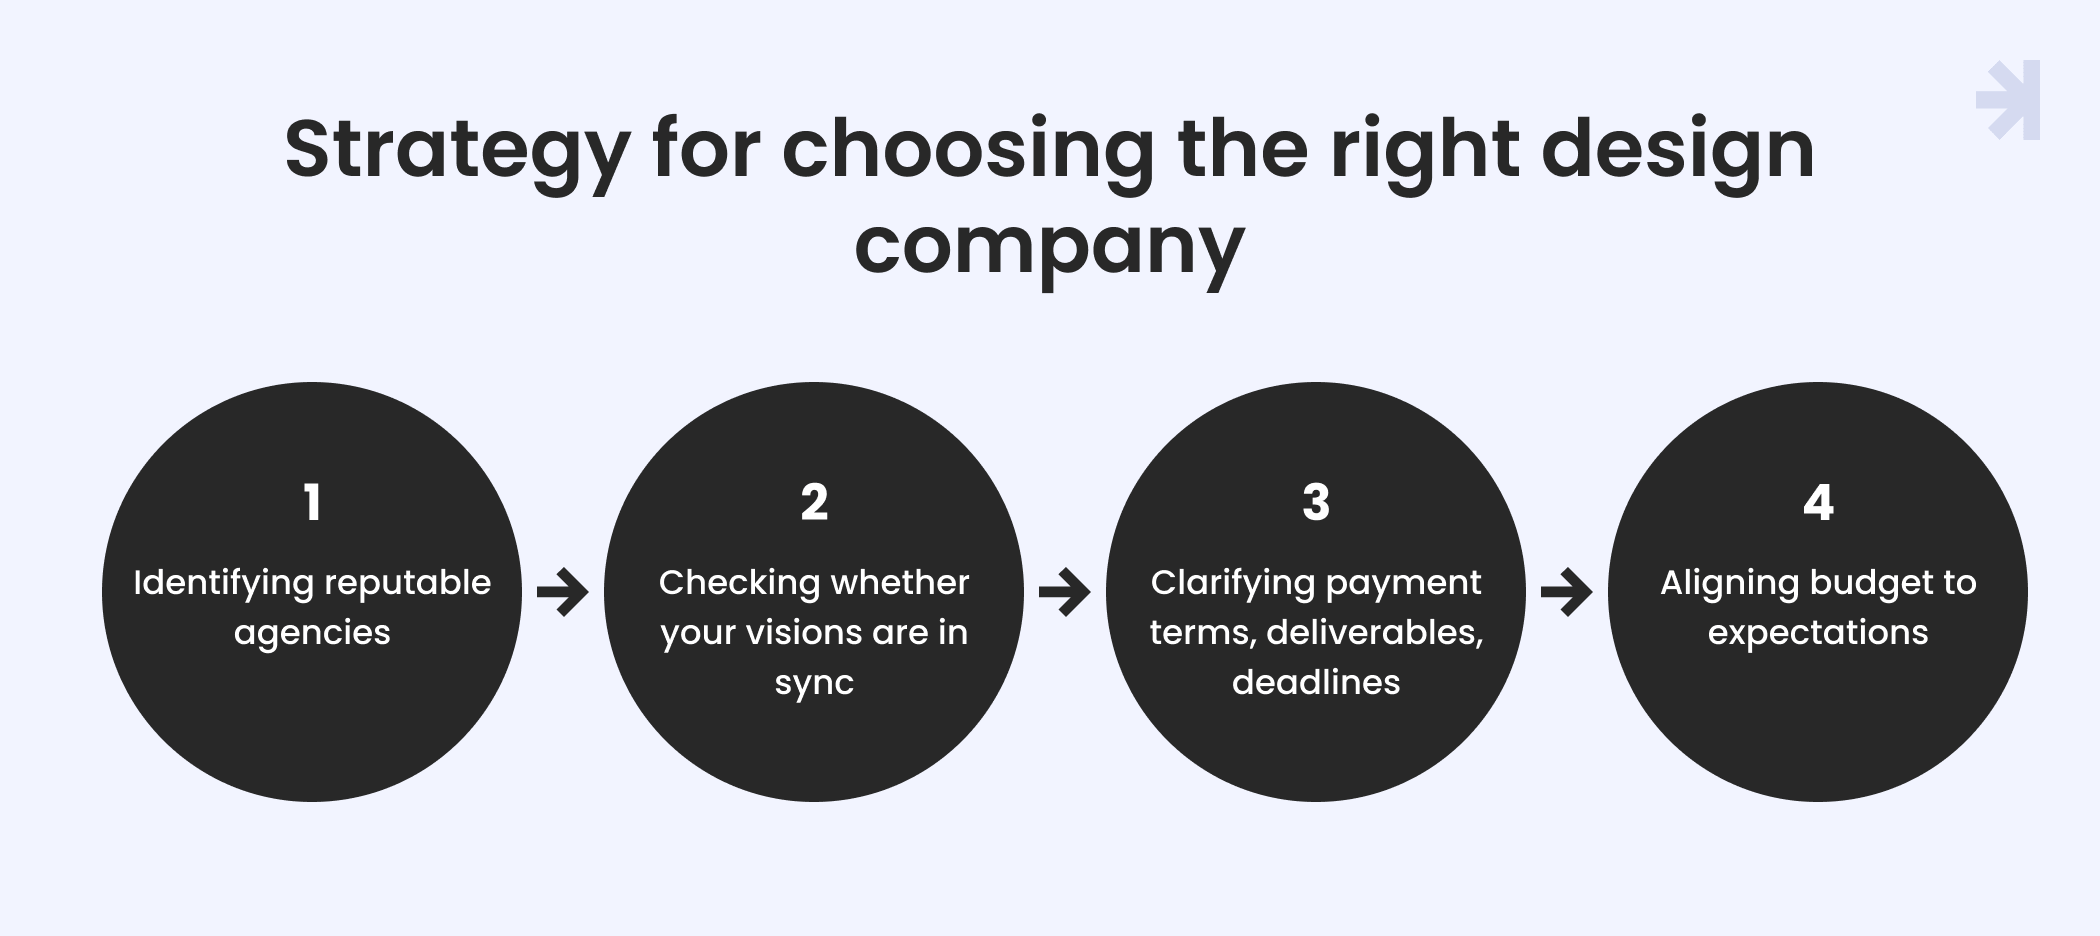 Strategy for choosing the right design company